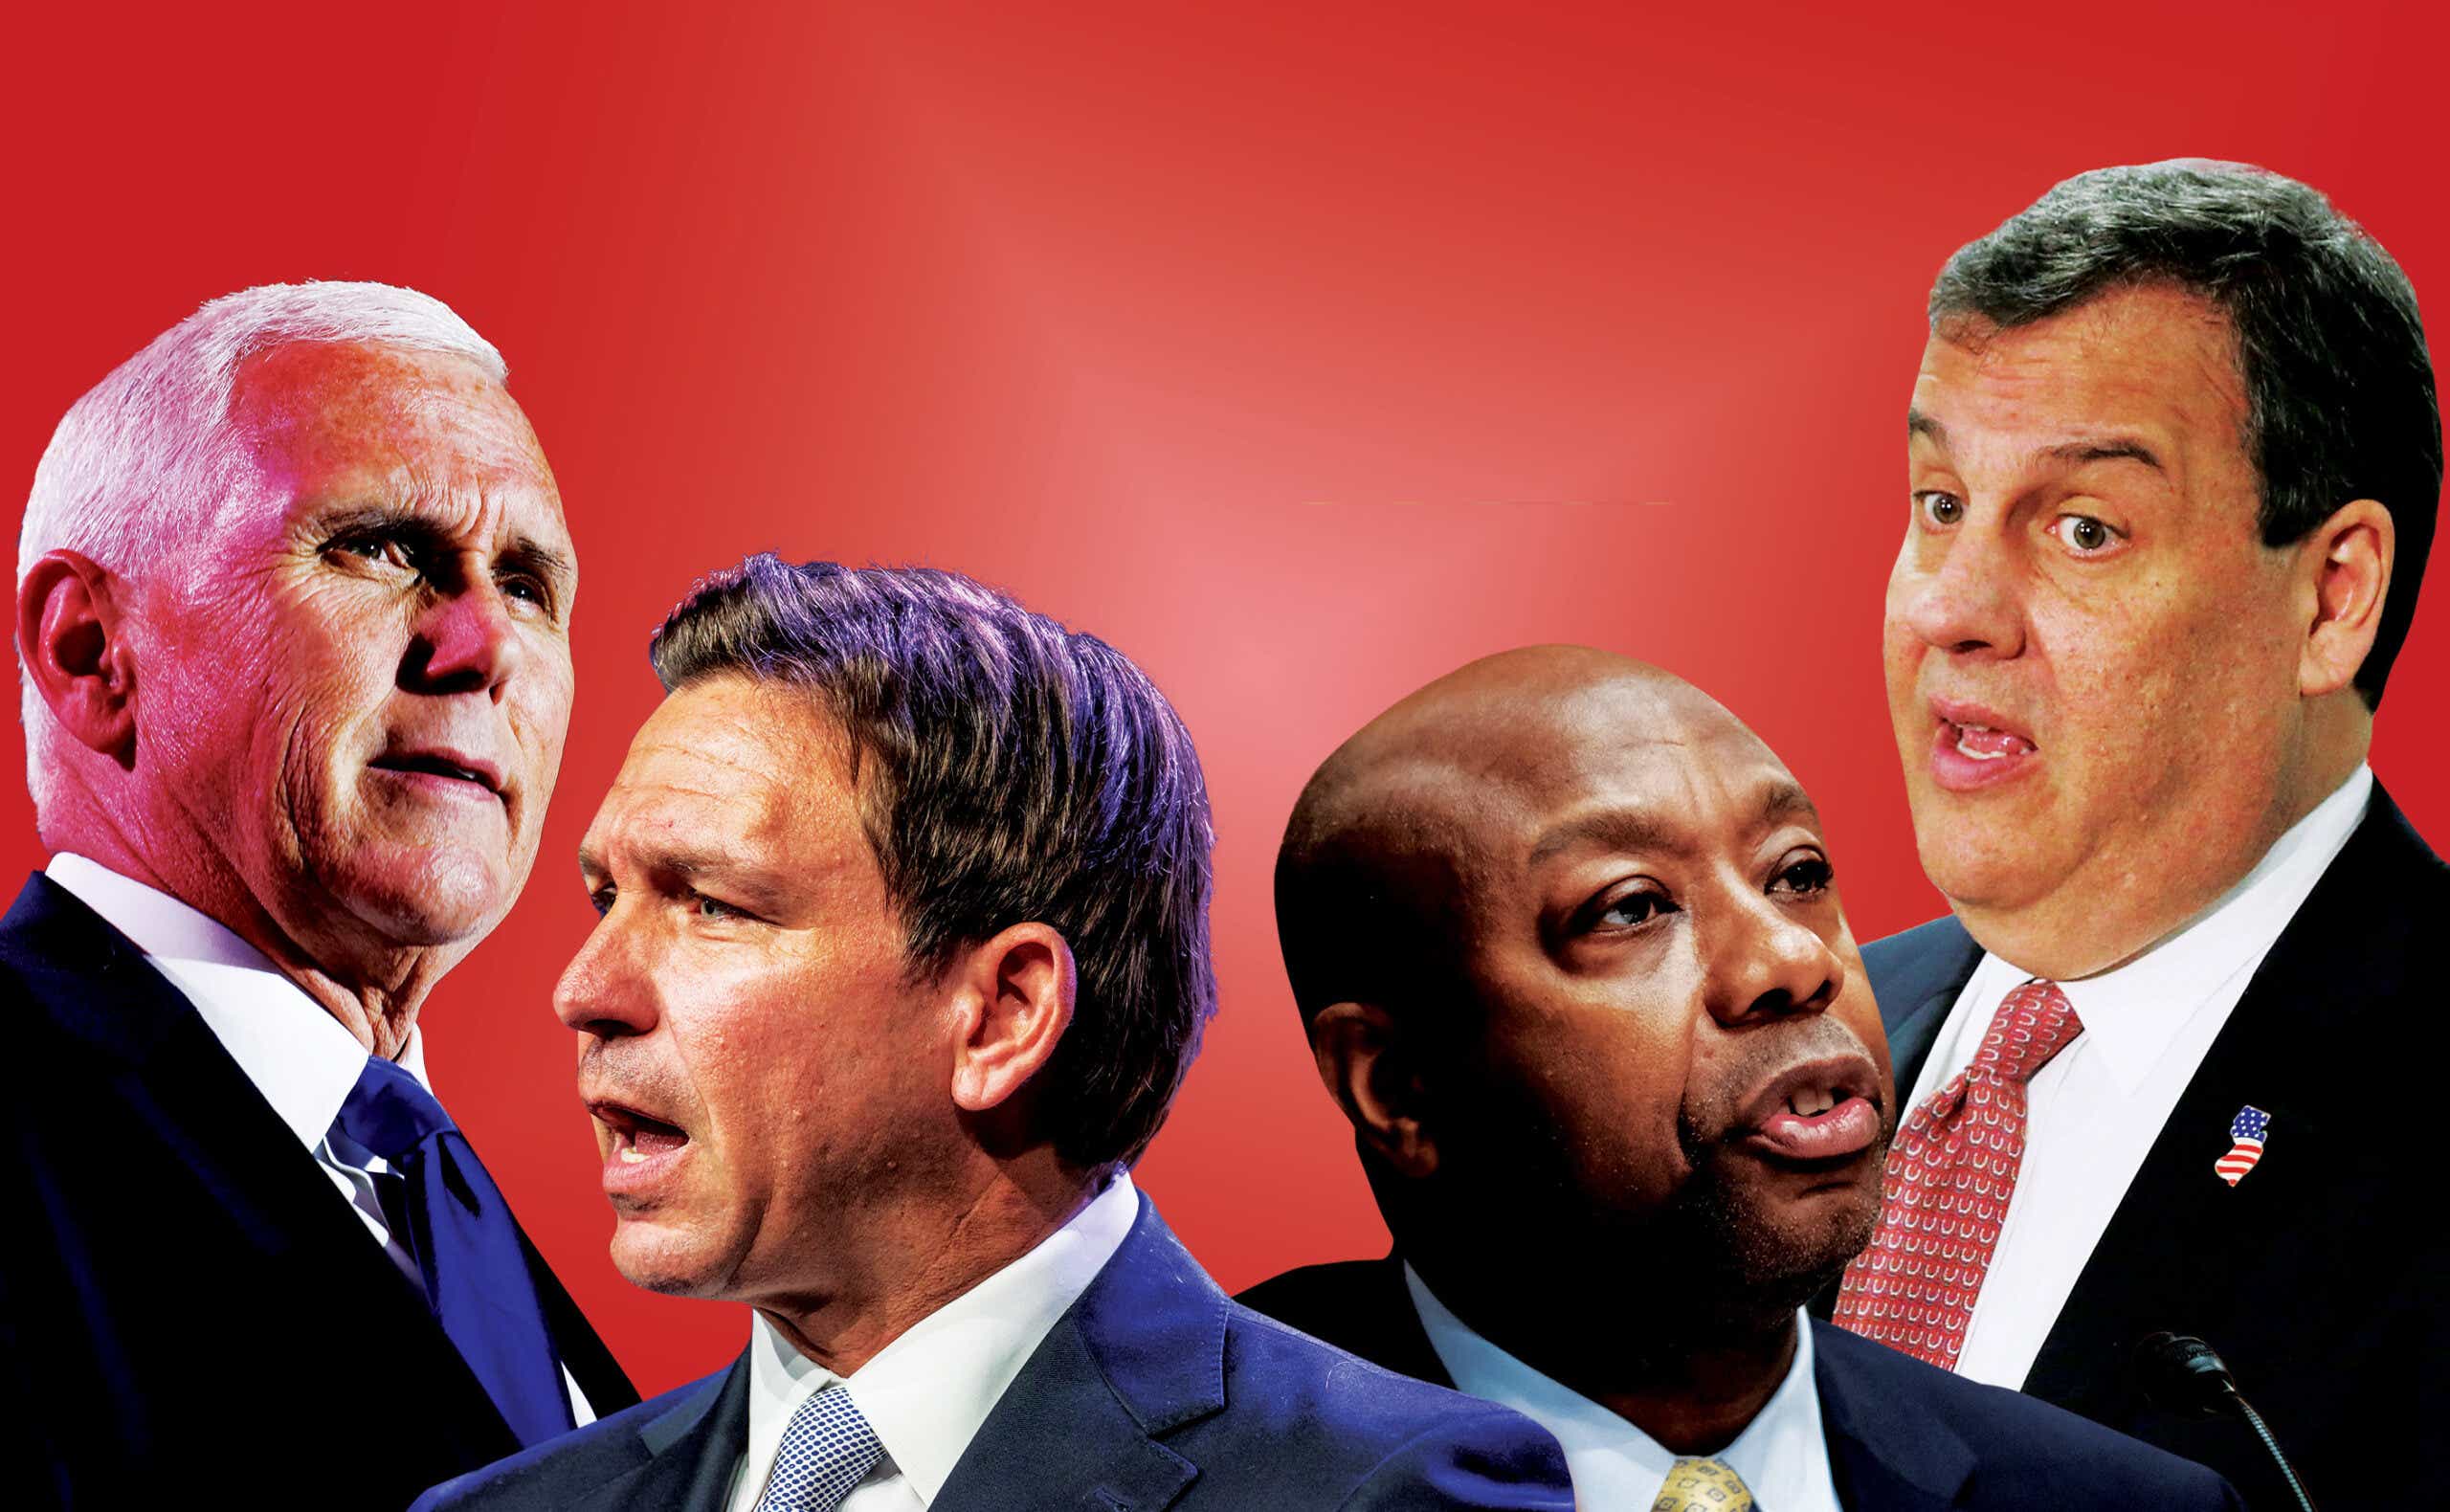 Mike Pence, Ron DeSantis, Tim Scott, and Chris Christie on red background